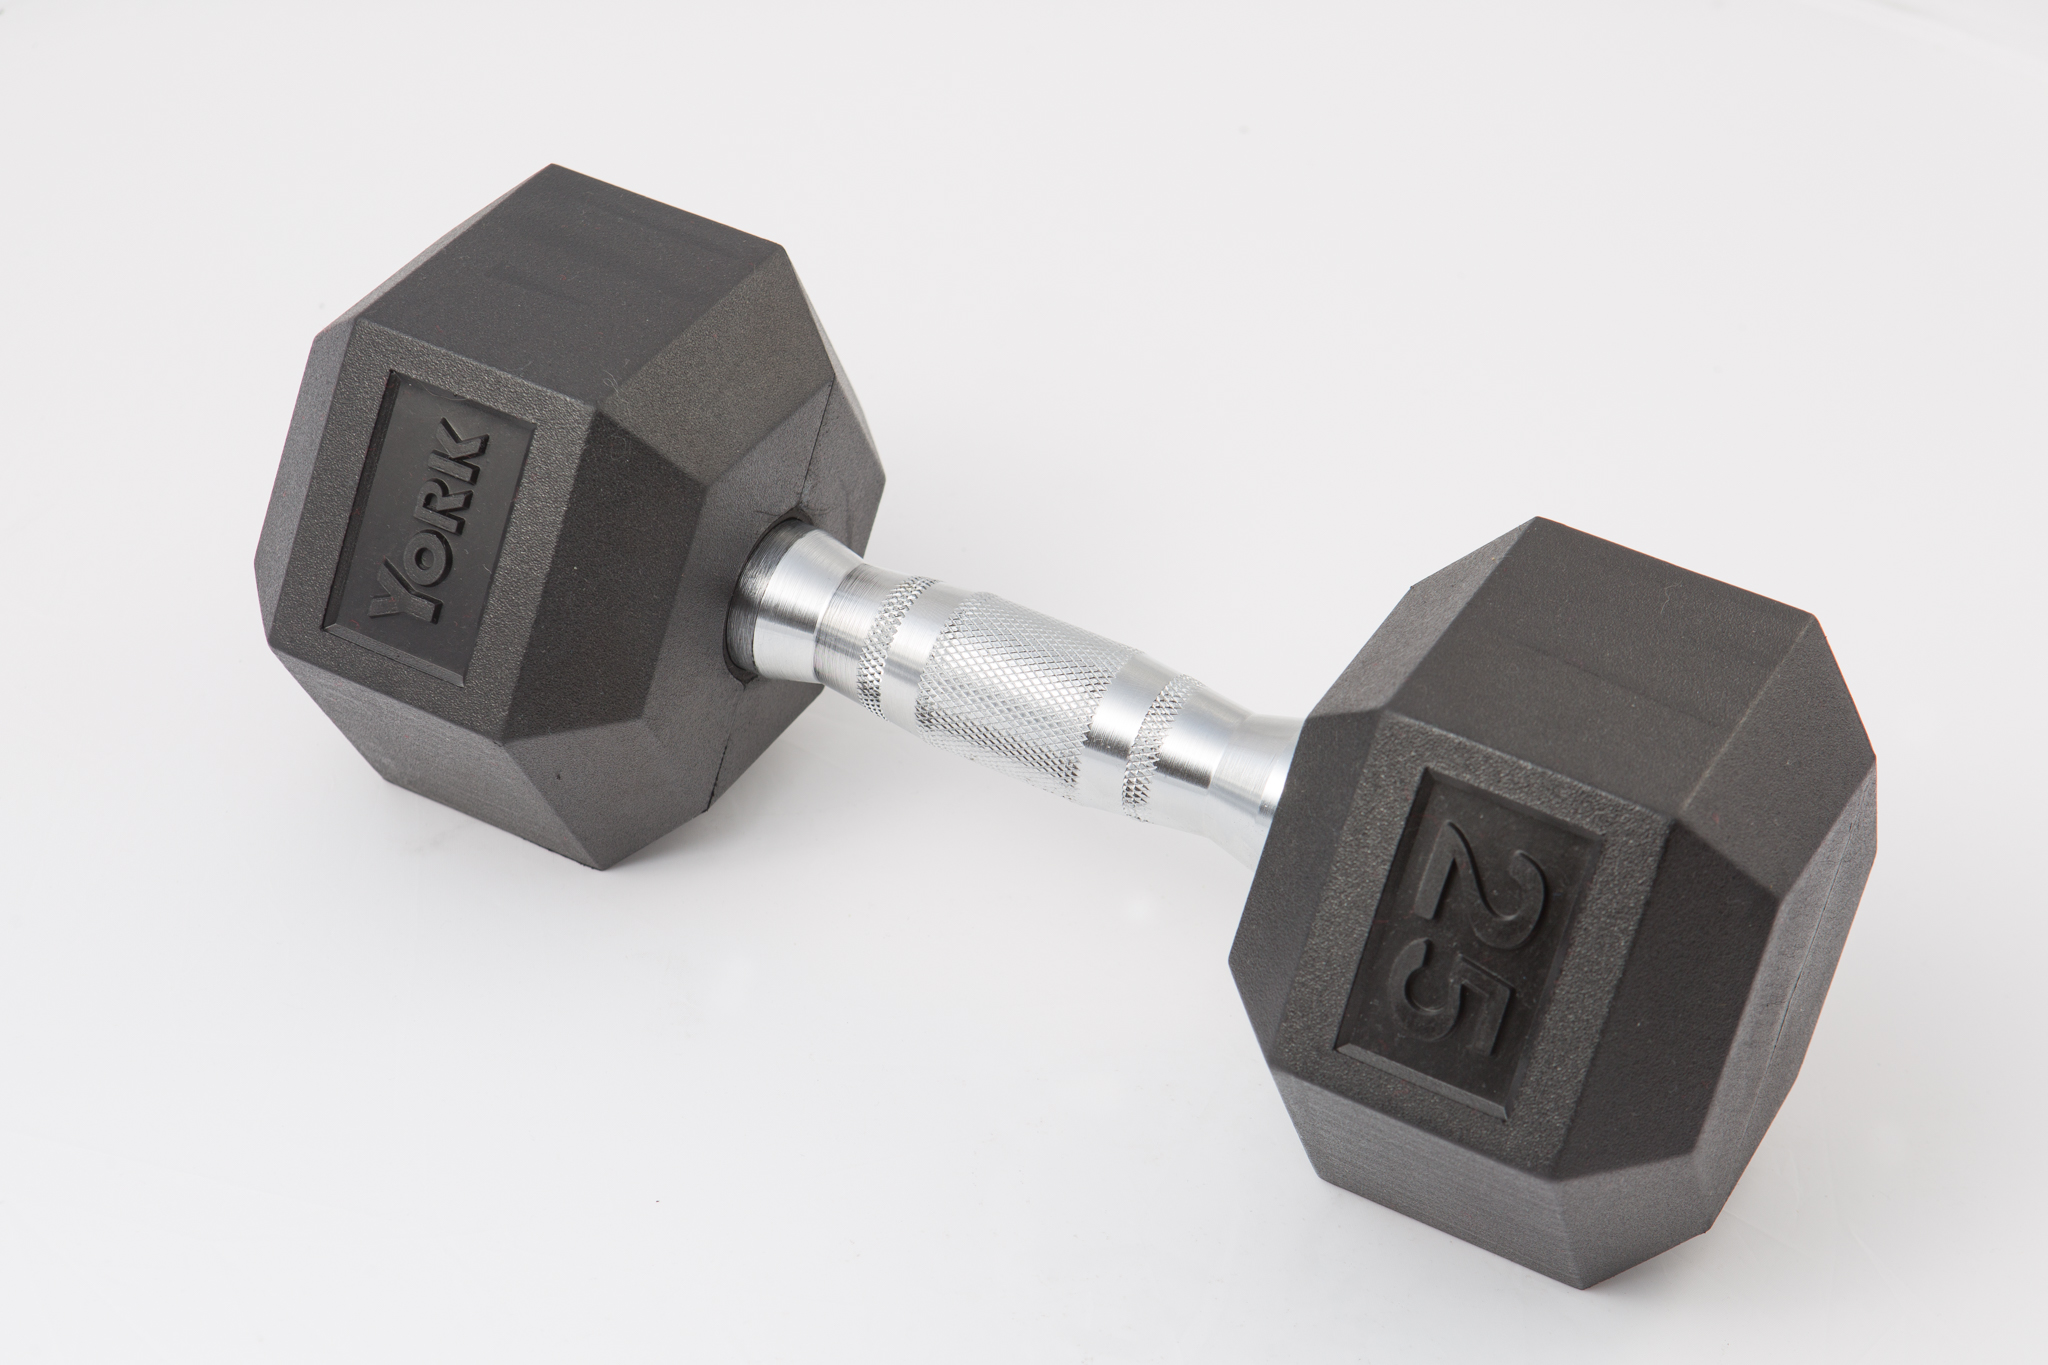 BRAND NEW 30LB SINGLE OF RUBBER COATED HEX DUMBBELLS WEIGHTS FOR COMMERCIAL GYM 